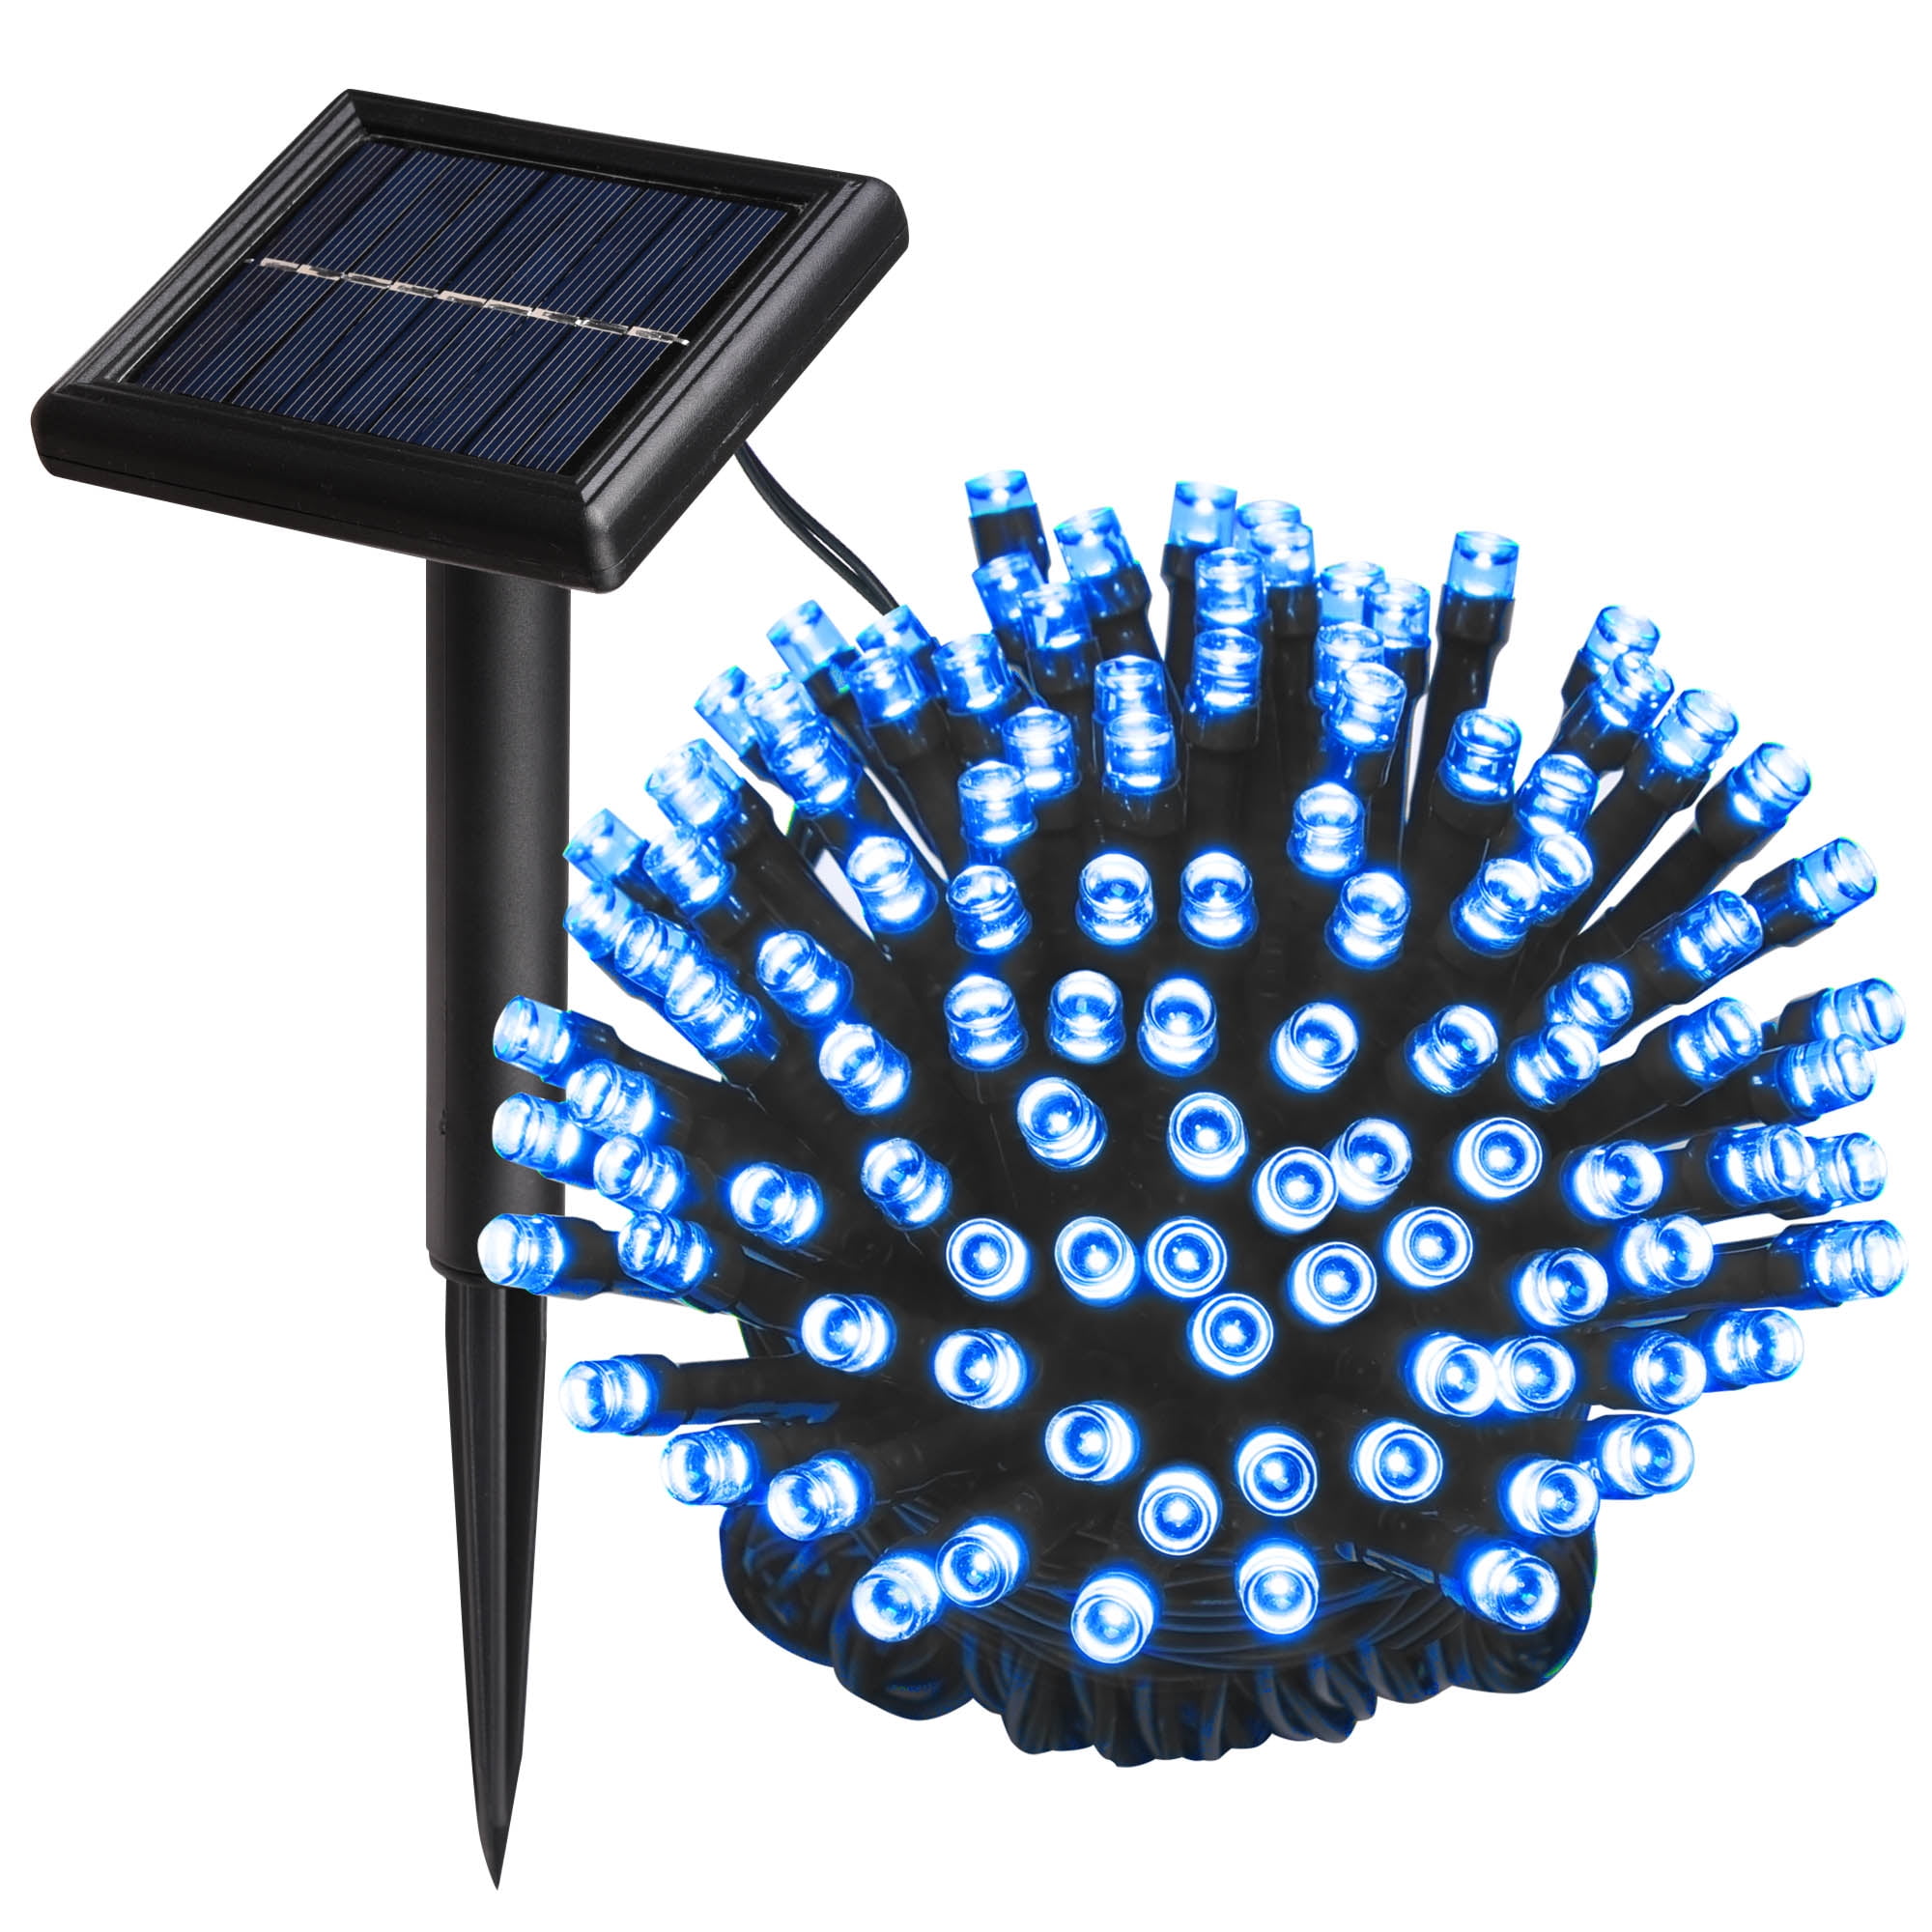 60 LED Solar Power Lamp For Sign Board Farm Advertising 16feet Cable 